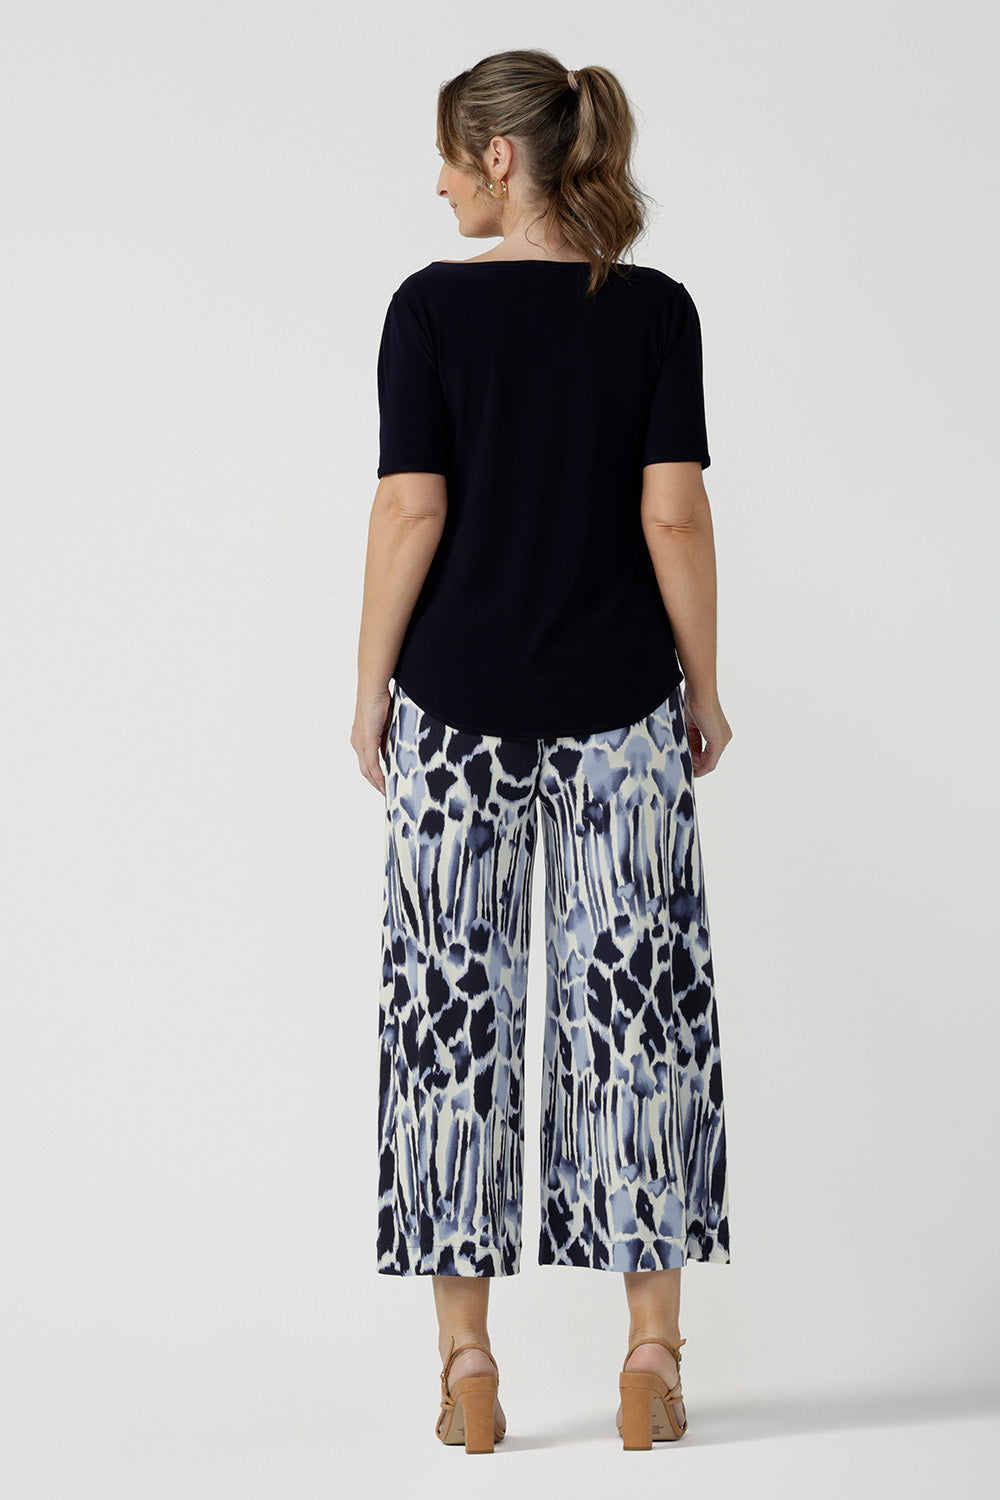 Back view of a size 10, 40 plus woman wearing cropped, wide leg culotte pants in blue and white print with a short sleeve, boat neck navy blue top. Great summer pants, these culottes are easy care trousers and are comfortable as work wear pants or for casual wear. Made in Australia by Australian women's clothes brand, Leina & Fleur.